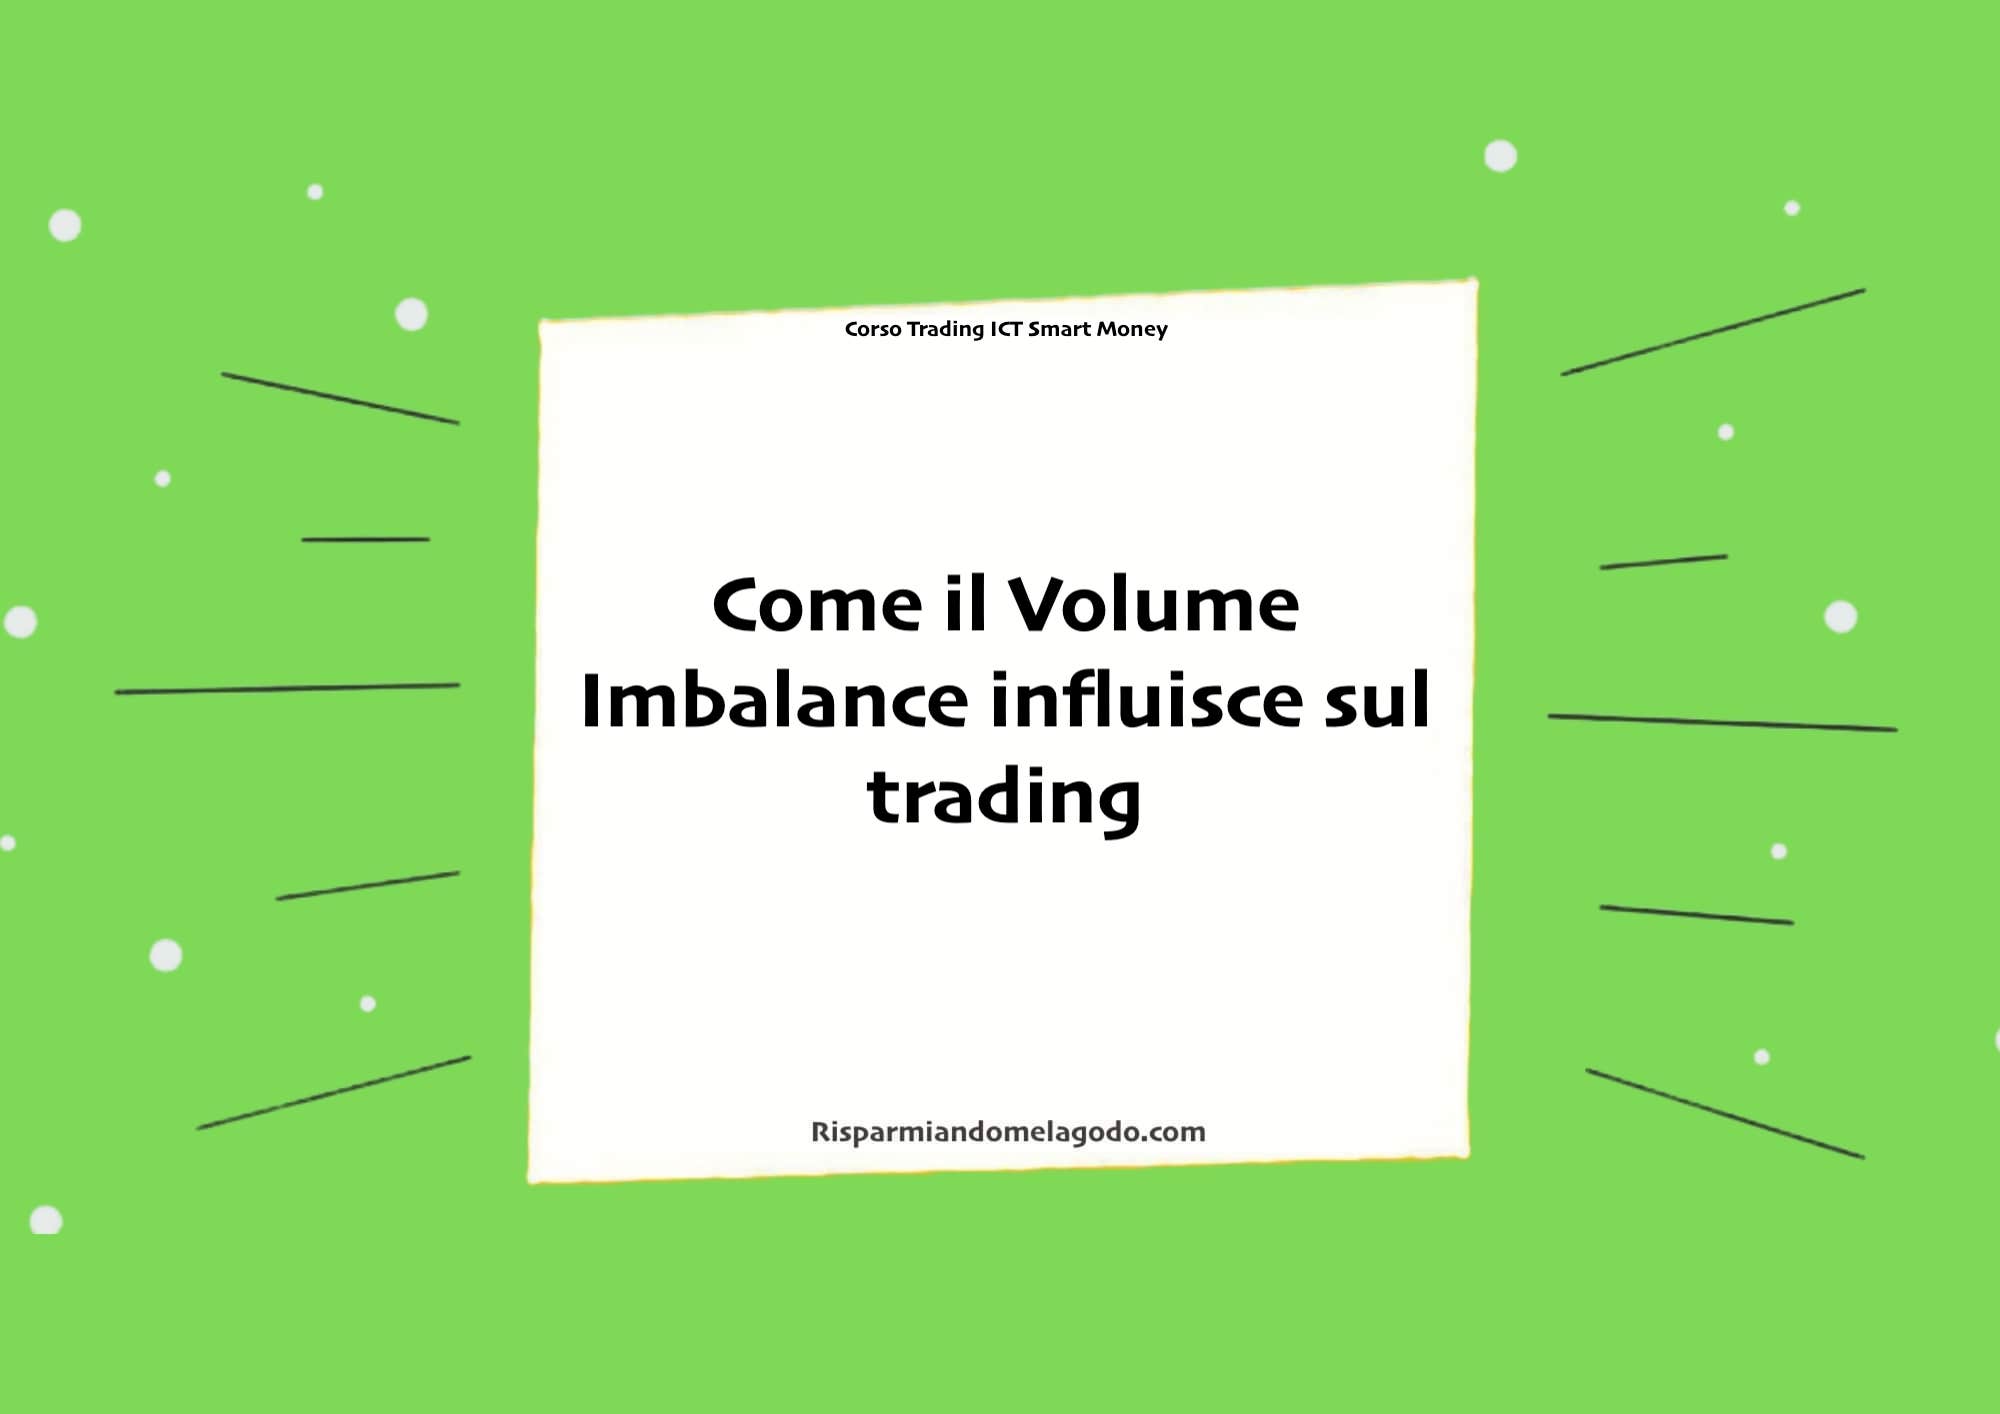 Come il Volume Imbalance influisce sul trading